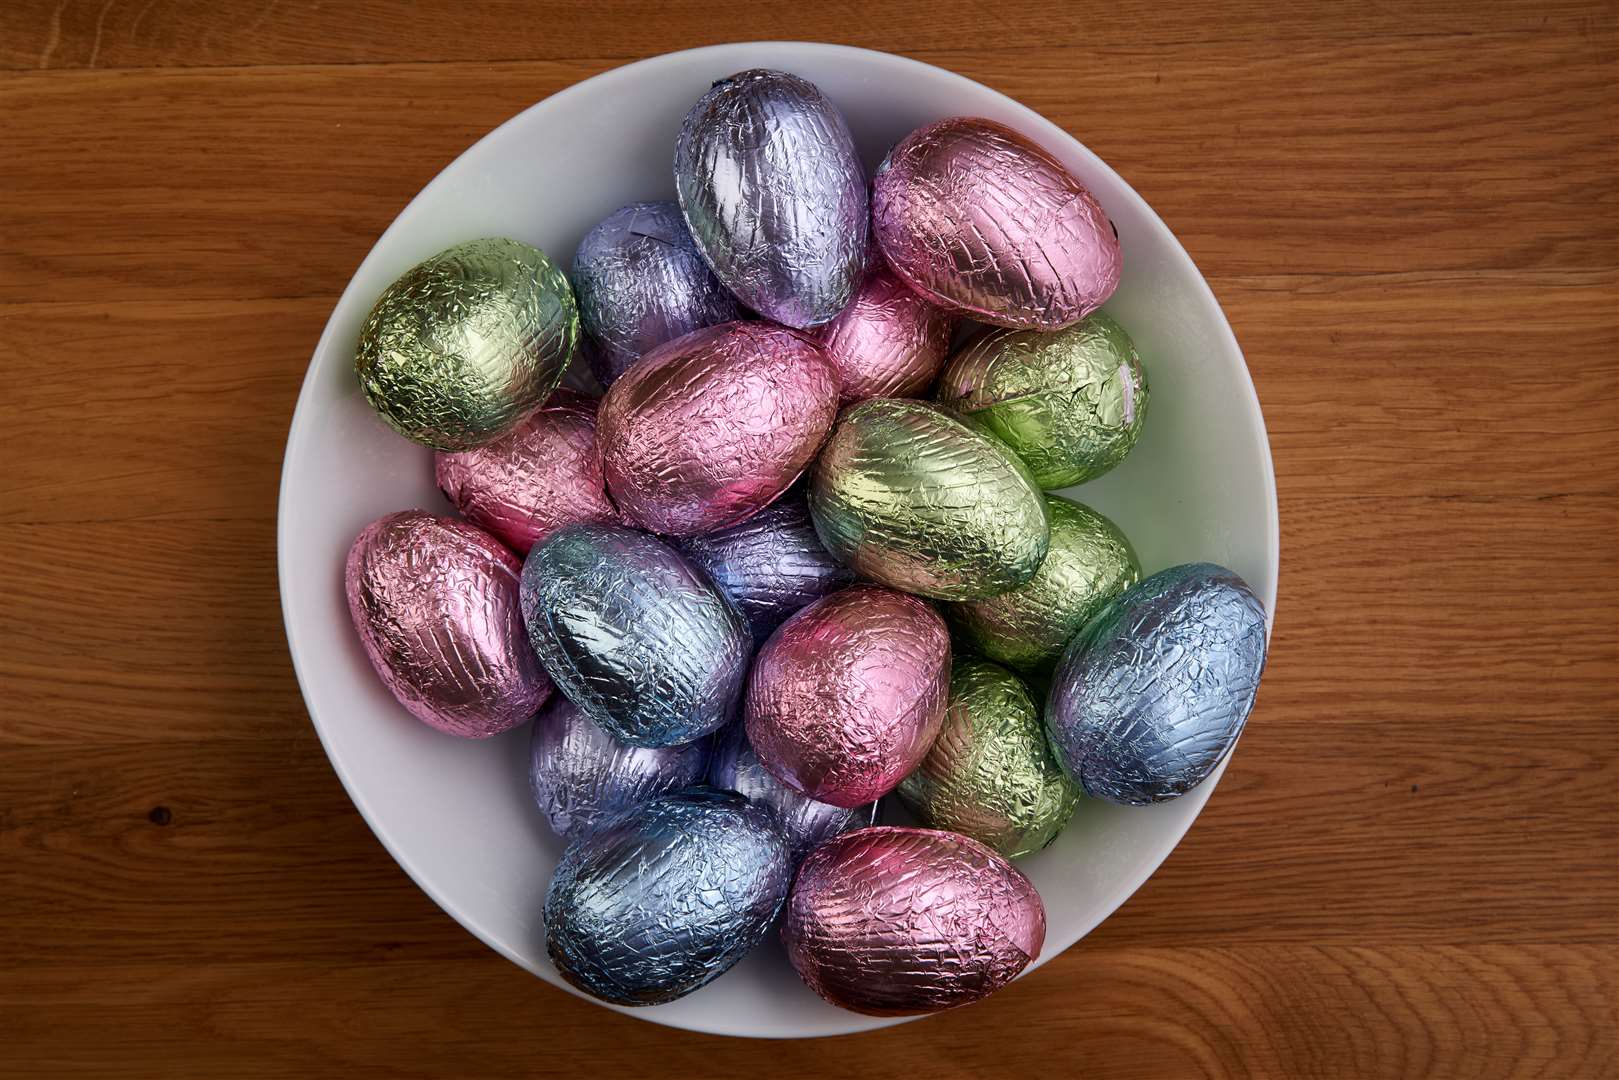 Financial struggles have not stopped consumers spending £88 million more on Easter treats in the first three months of this year than last year (John Walton/PA)